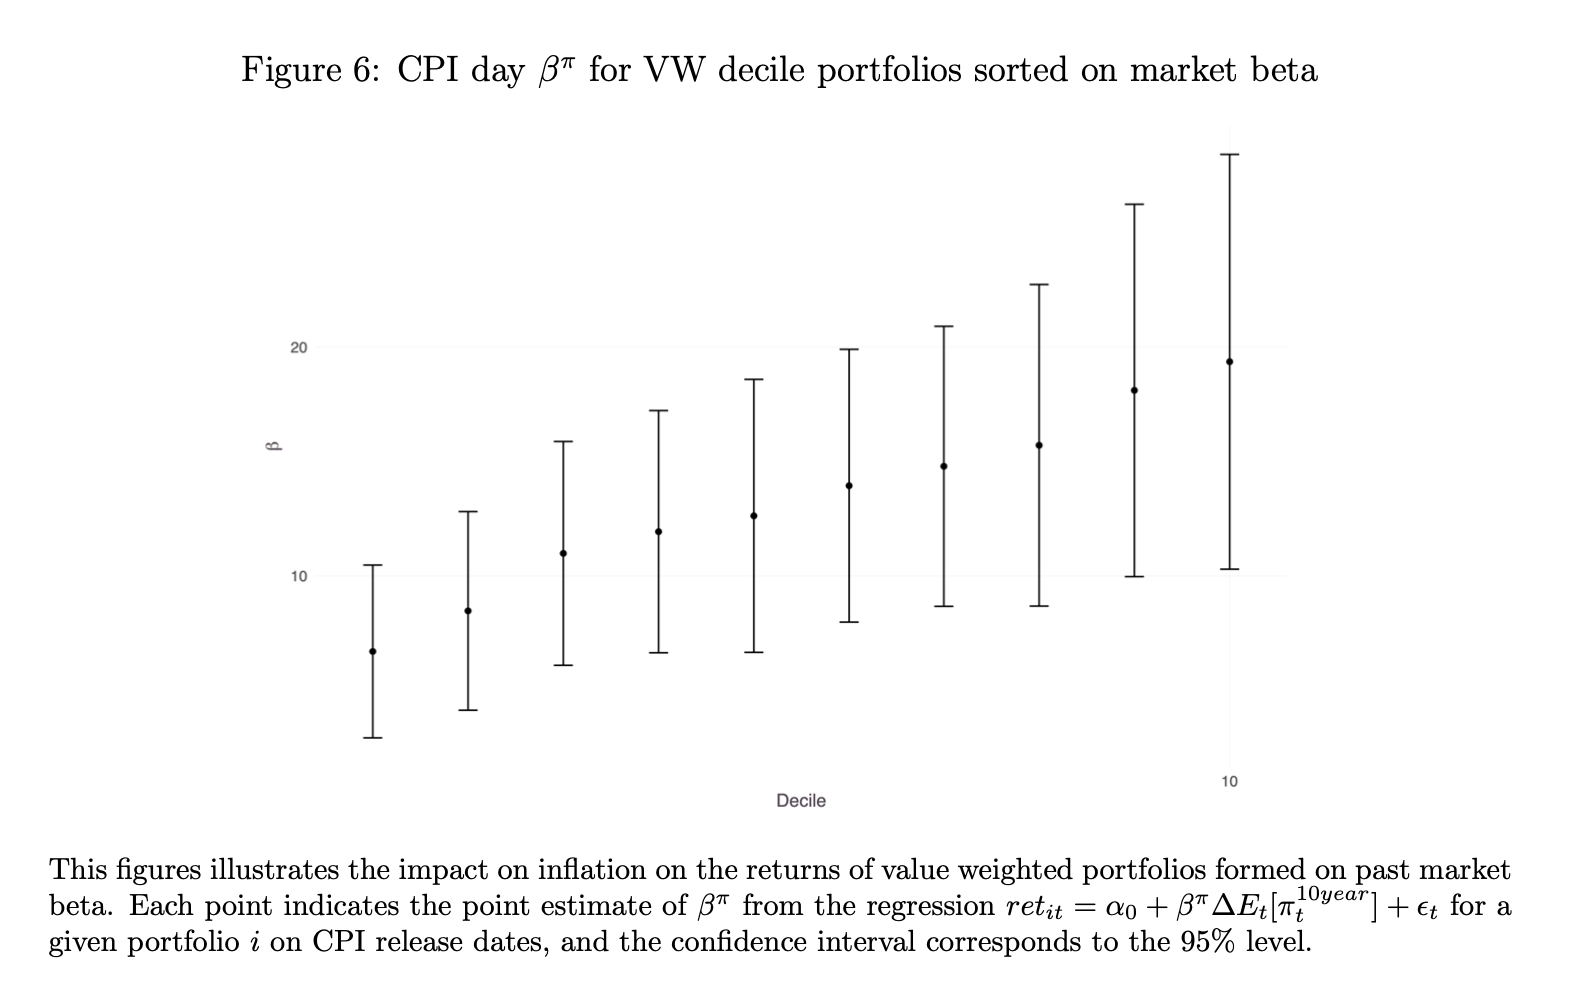 impact on inflation on the returns of value-weighted portfolios formed on past market beta